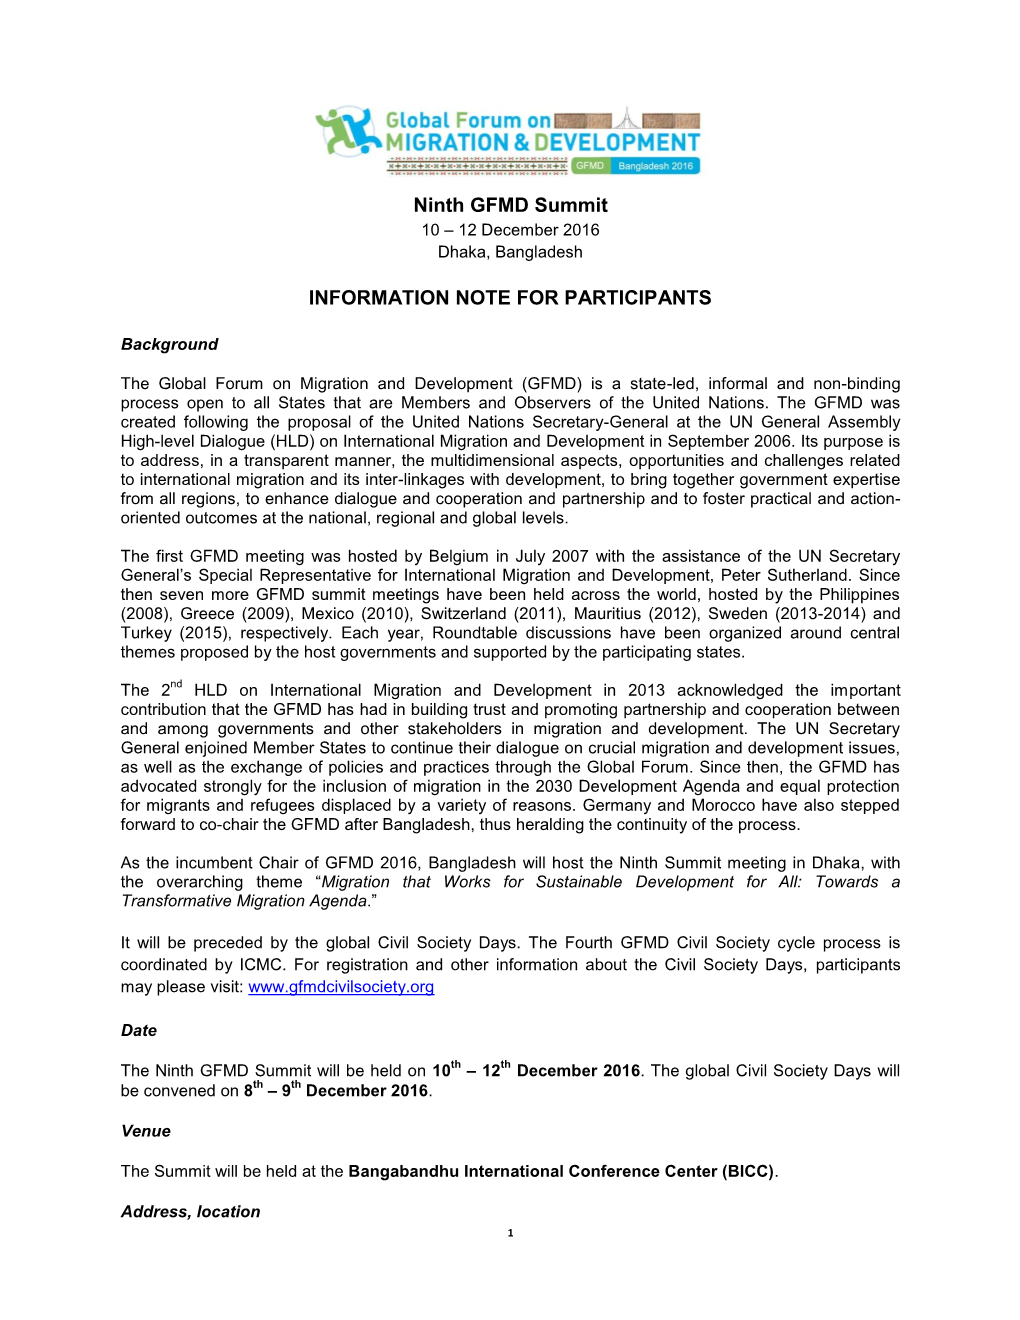 Ninth GFMD Summit INFORMATION NOTE for PARTICIPANTS